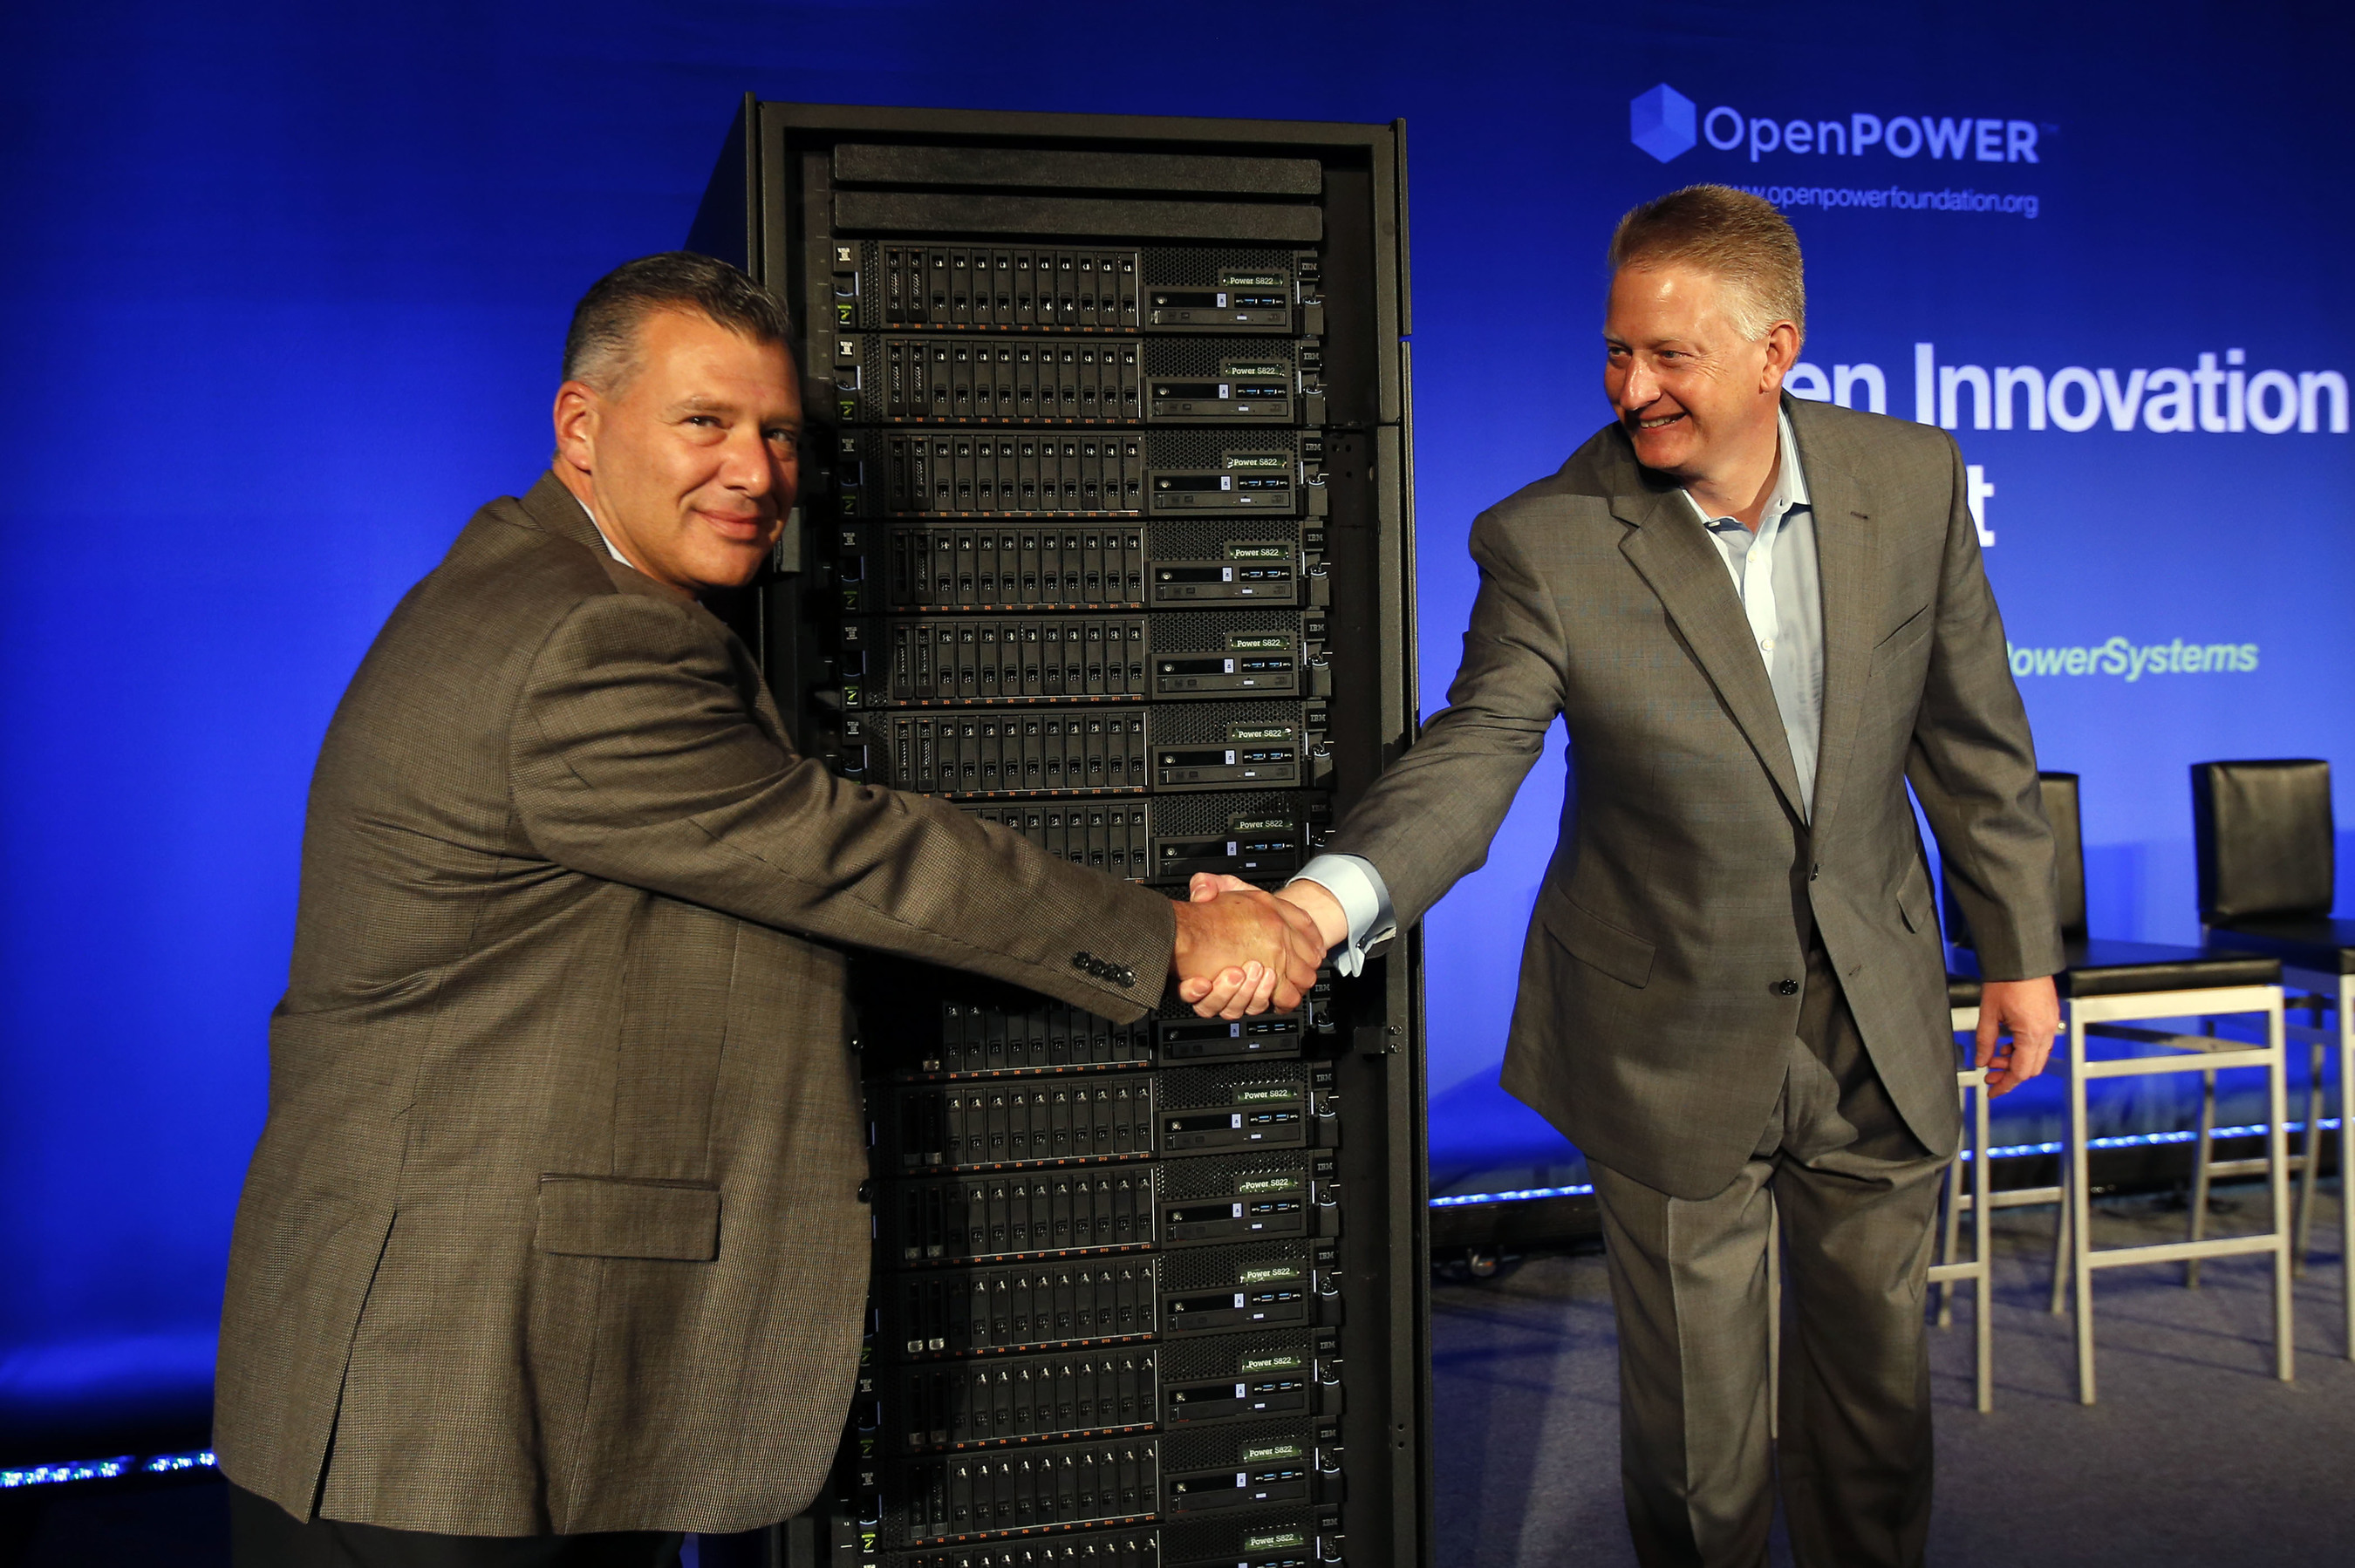 IBM revealed its POWER8 Systems today, the first servers exploiting for OpenPOWER technology. (PRNewsFoto/IBM)